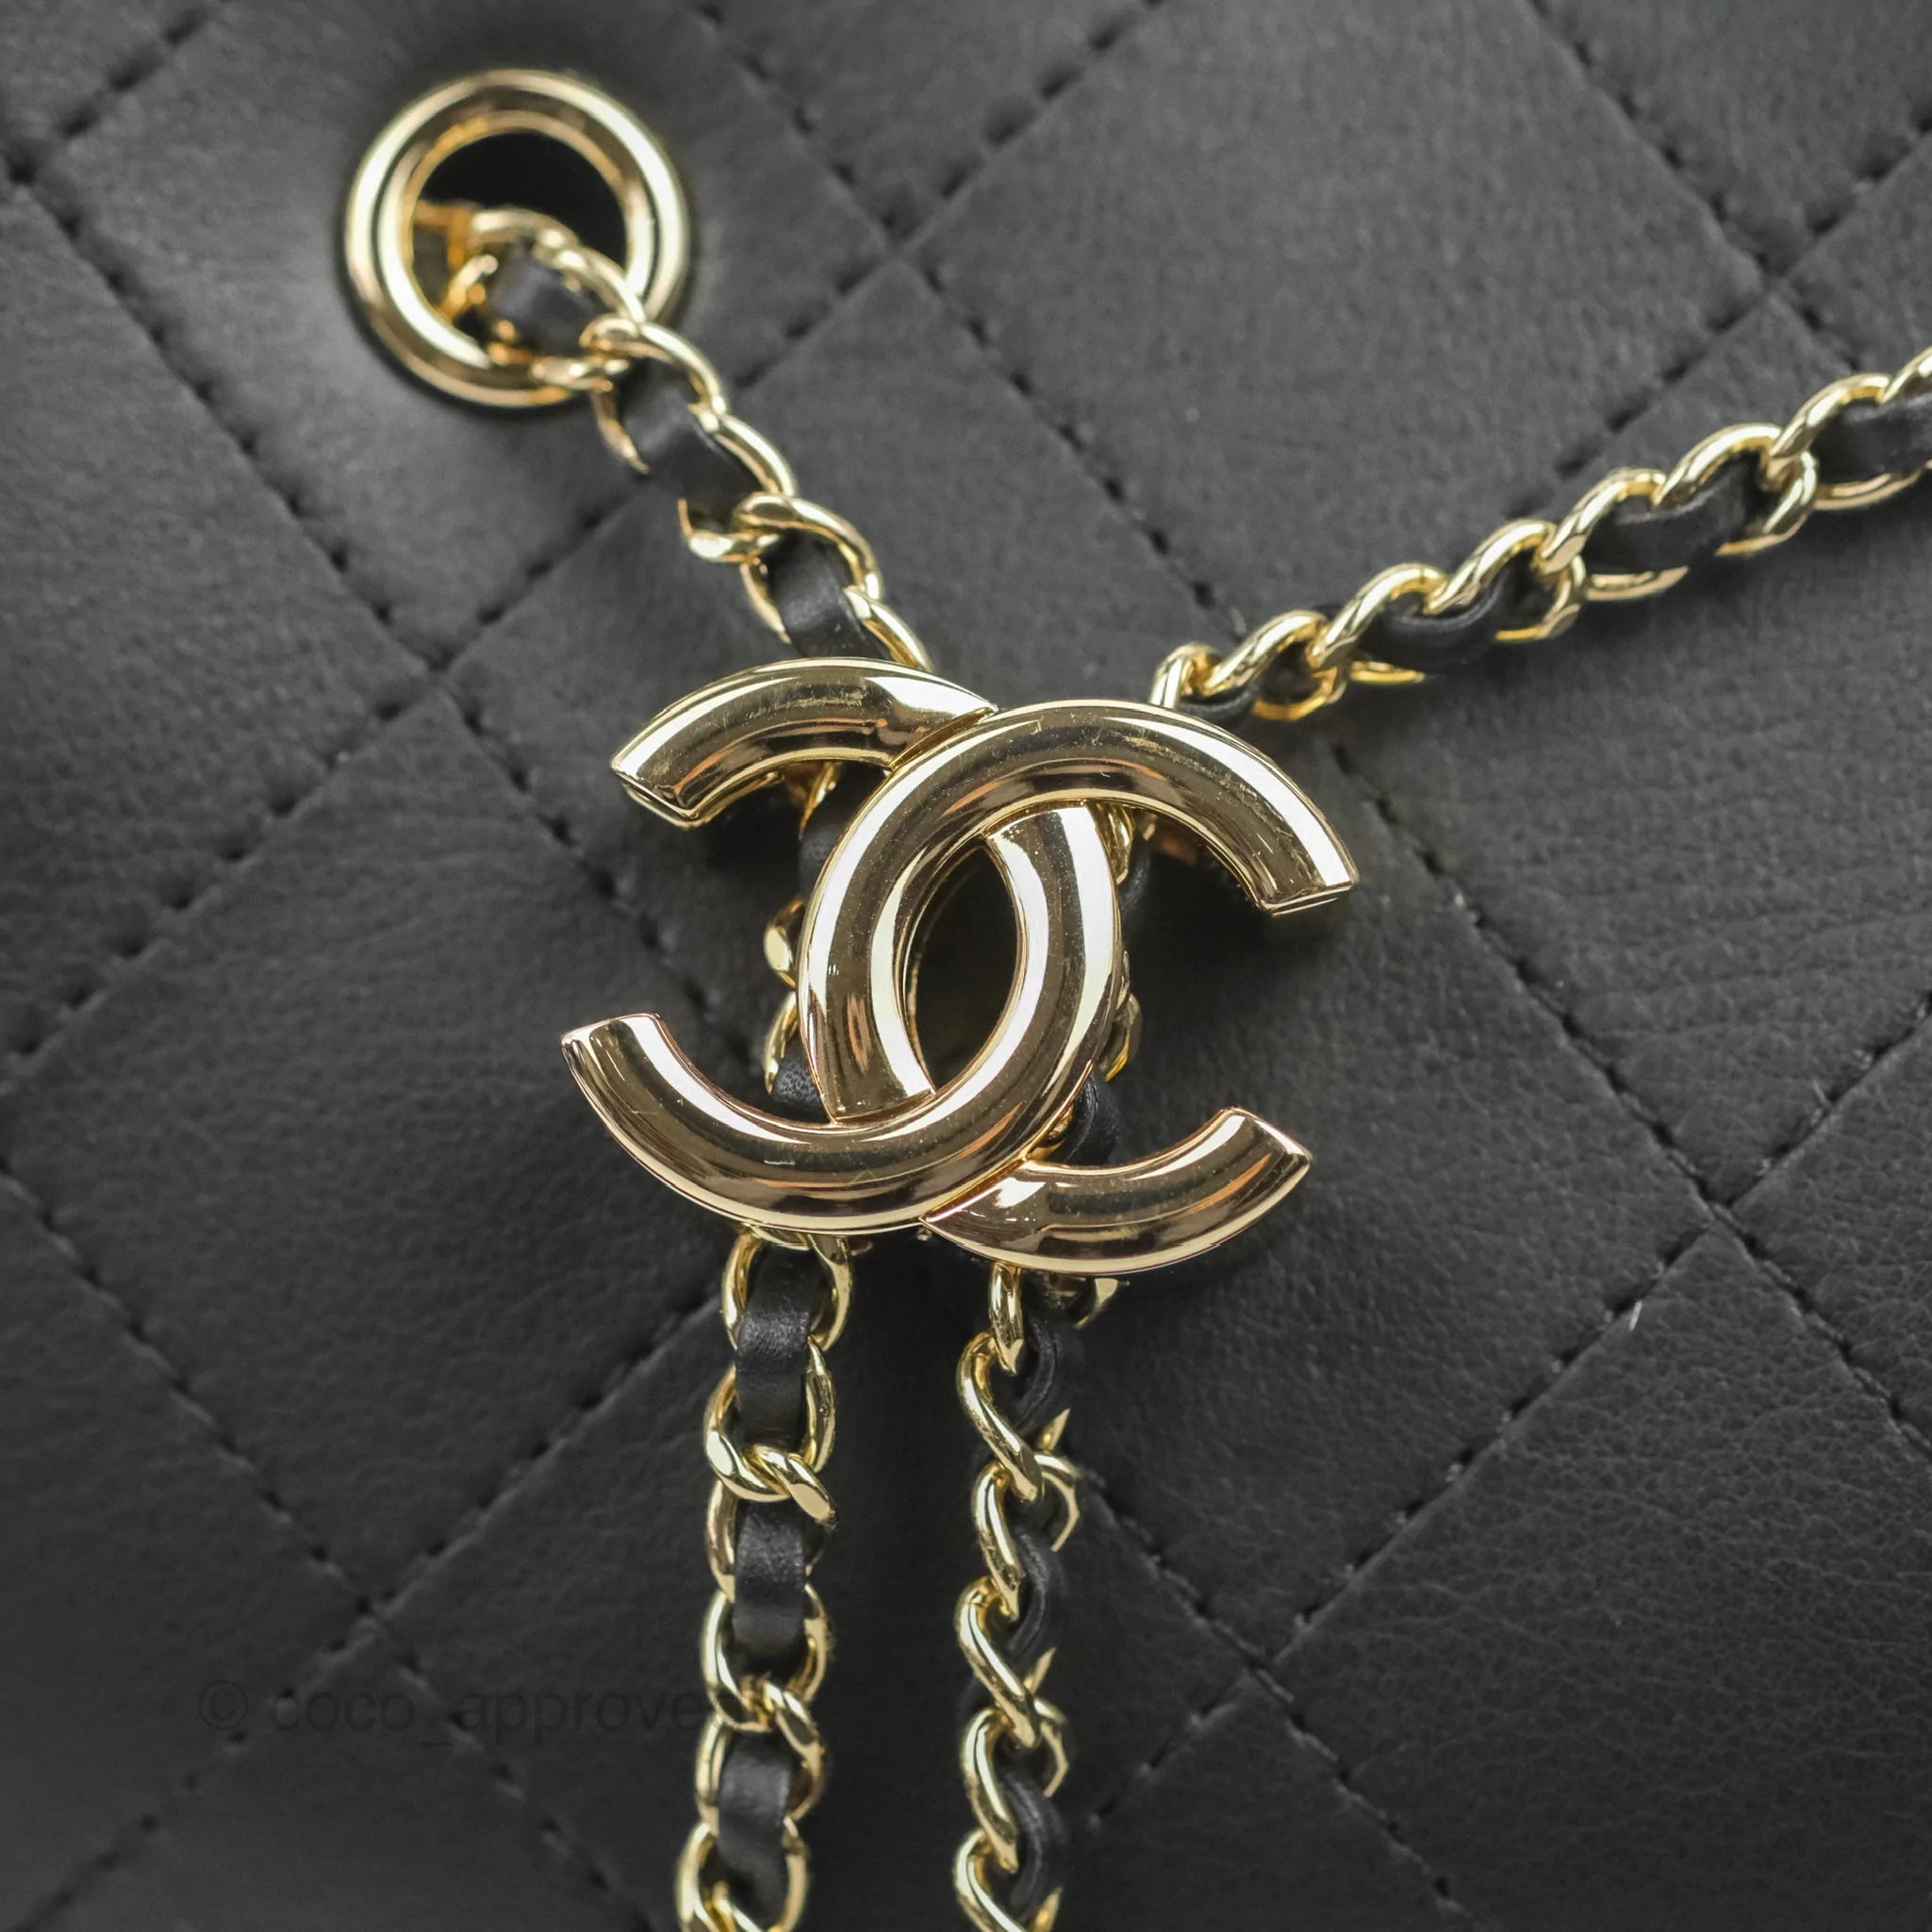 Chanel Black Quilted Caviar Micro Drawstring Bucket Bag with Chain Gold Hardware, 2021 (Very Good)